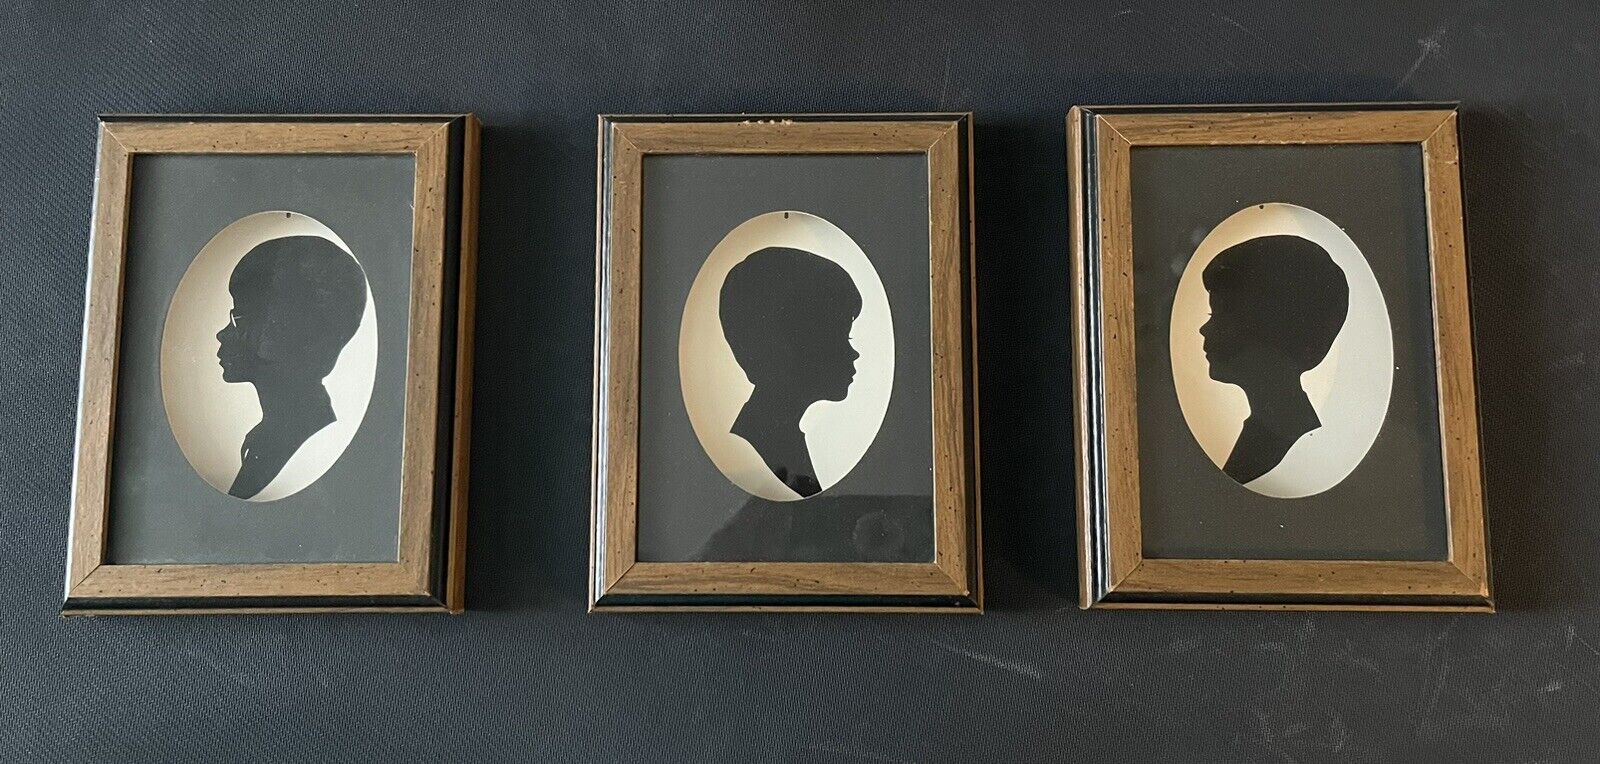 Set of 3 Vintage Pictures 1976 Silhouettes of Children in Shadow Box Frames